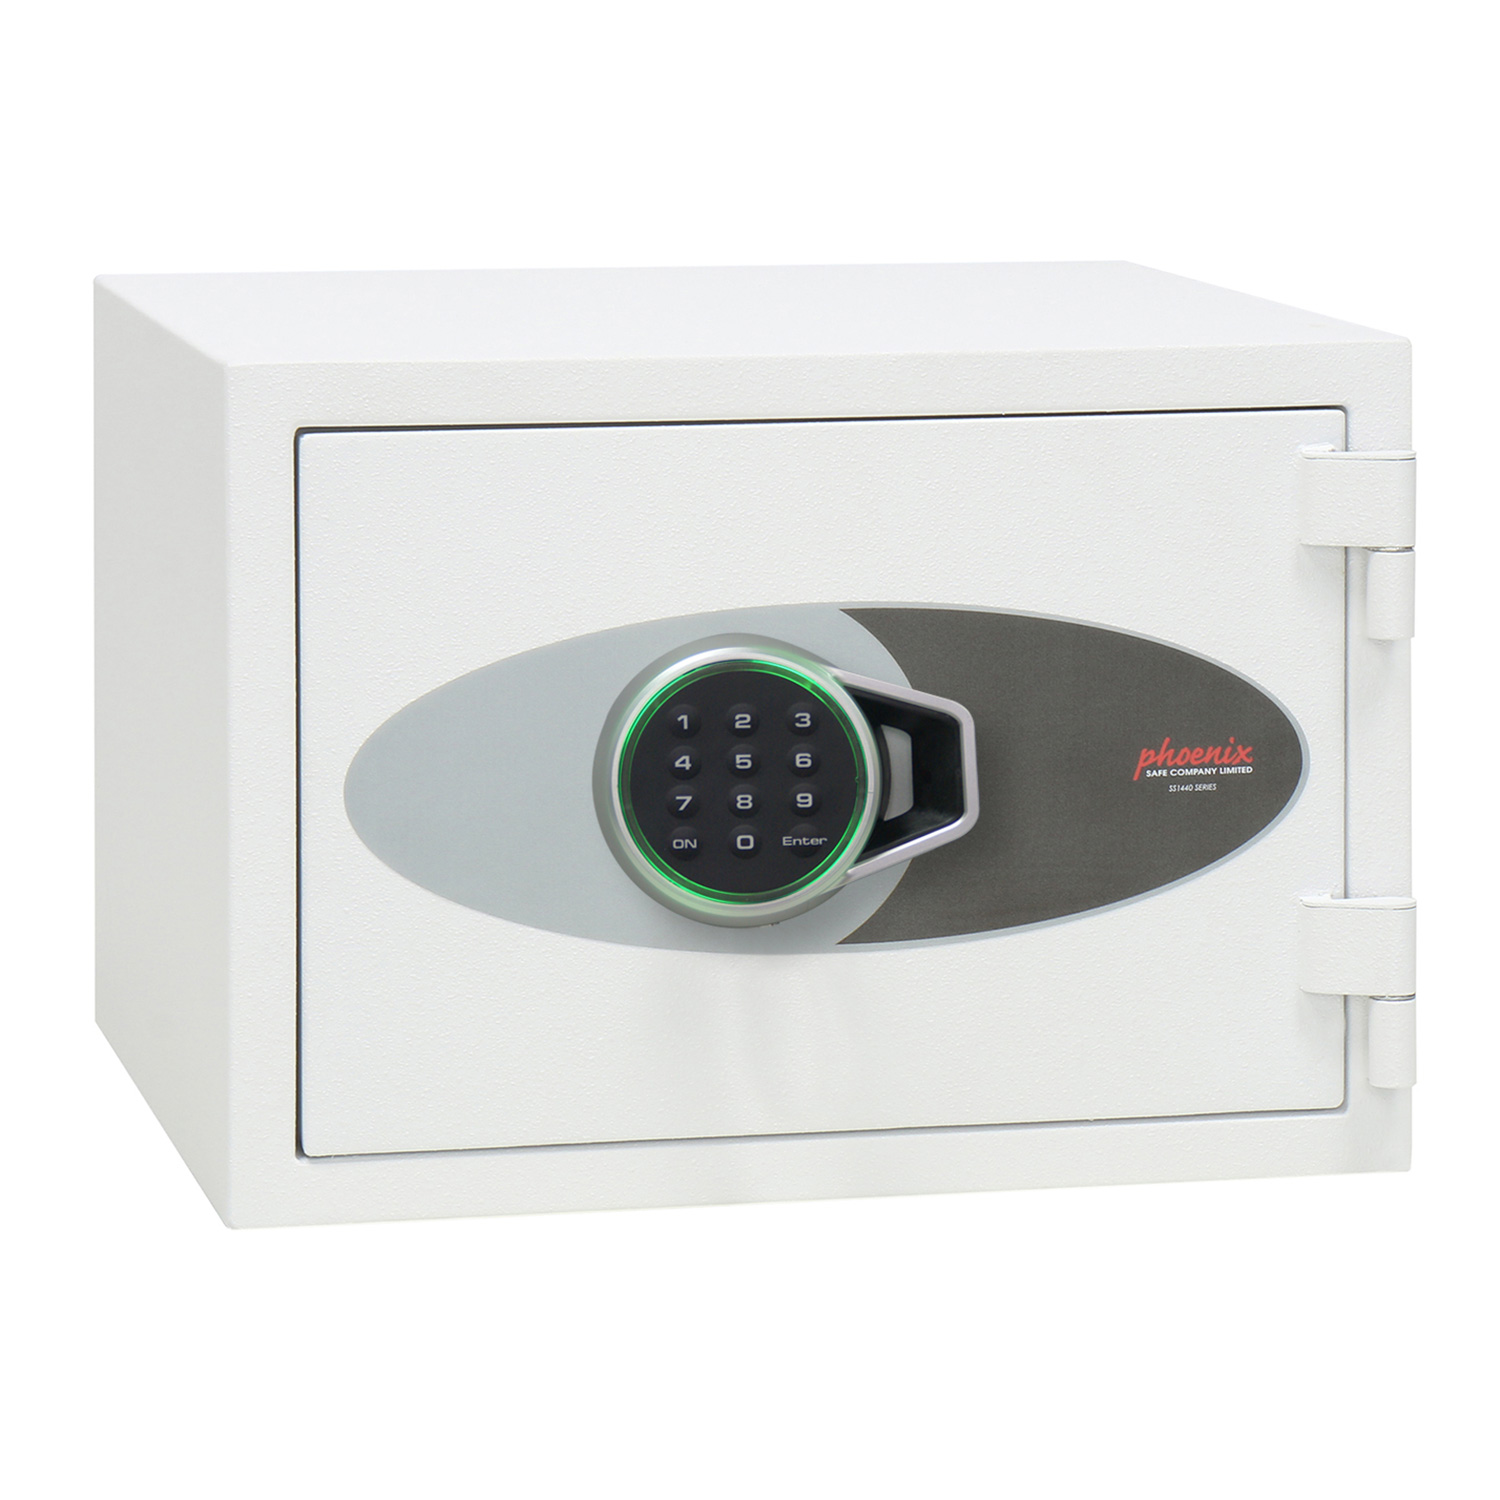 Phoenix Fortress Pro SS1441E Size 1 S2 Security Safe with Electronic Lock